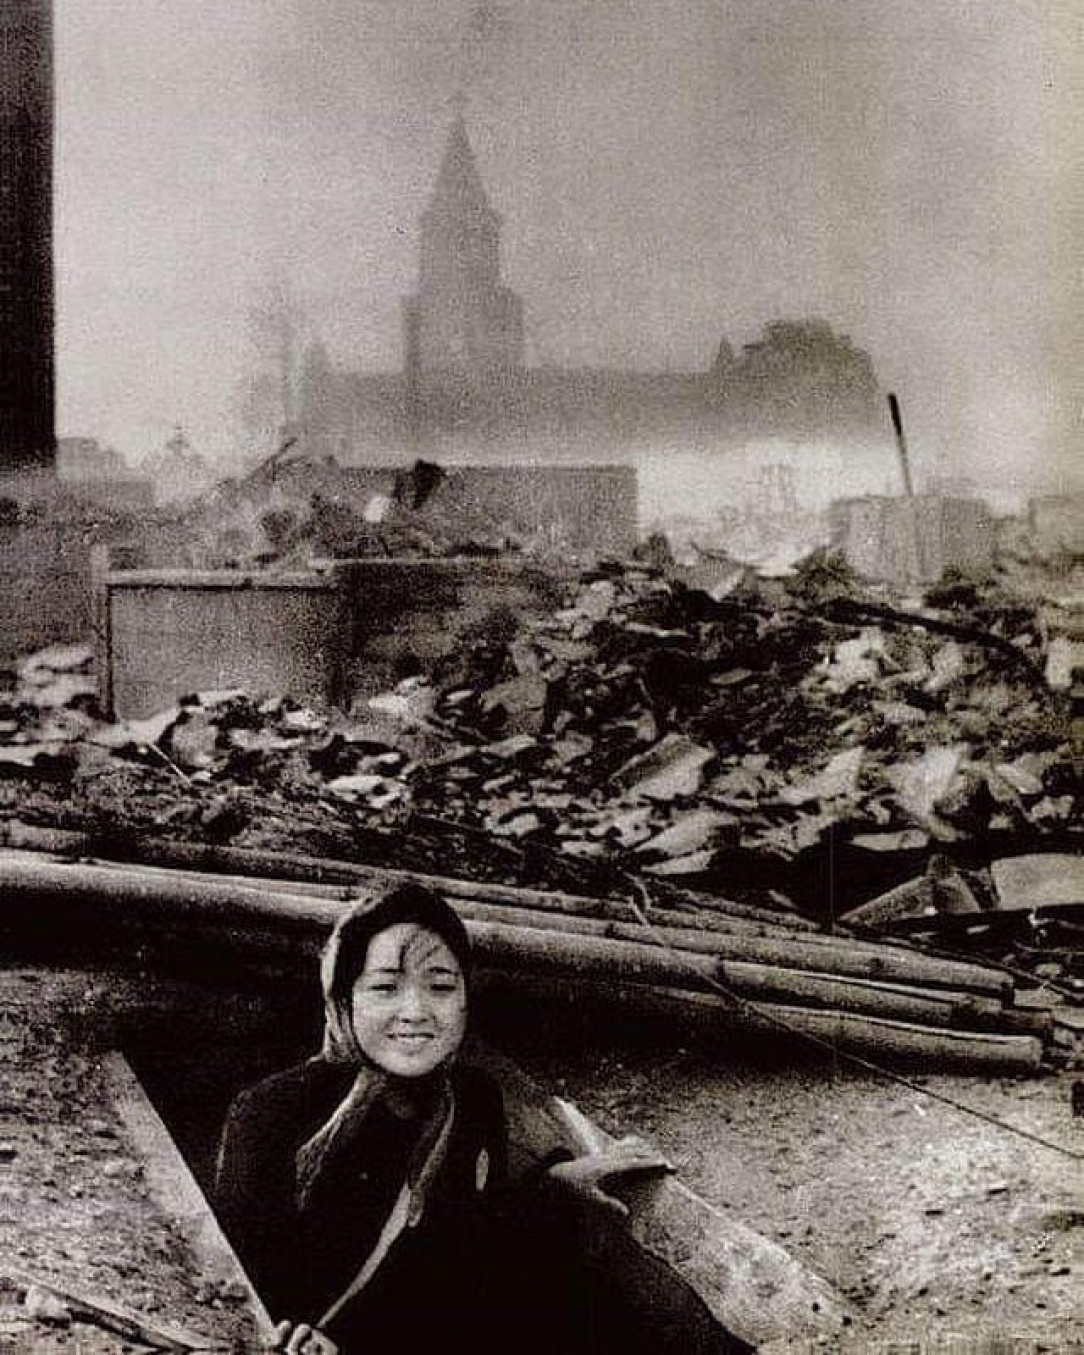 A young woman who survived the atomic bombing of Nagasaki, August 1945